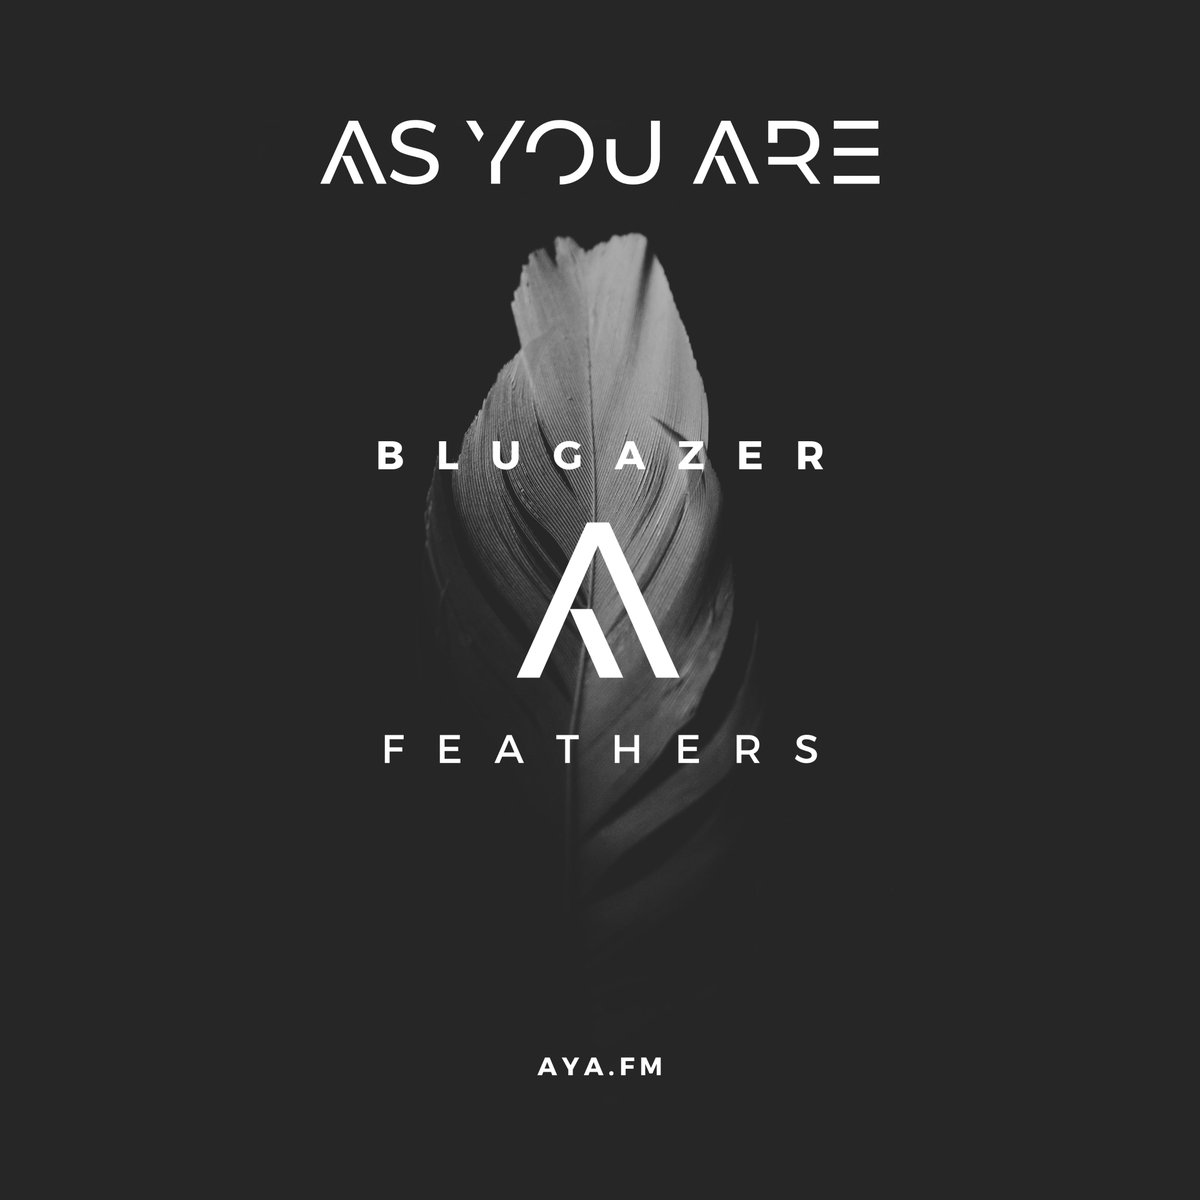 Feathers by @BlugazerMusic  is out on our label next week.

He’s been making waves with his productions at Monstercat Silk and his own line of independent releases that always blow us away.

Feathers is another perfect piece in the Blugazer discography.

🔗 on our page